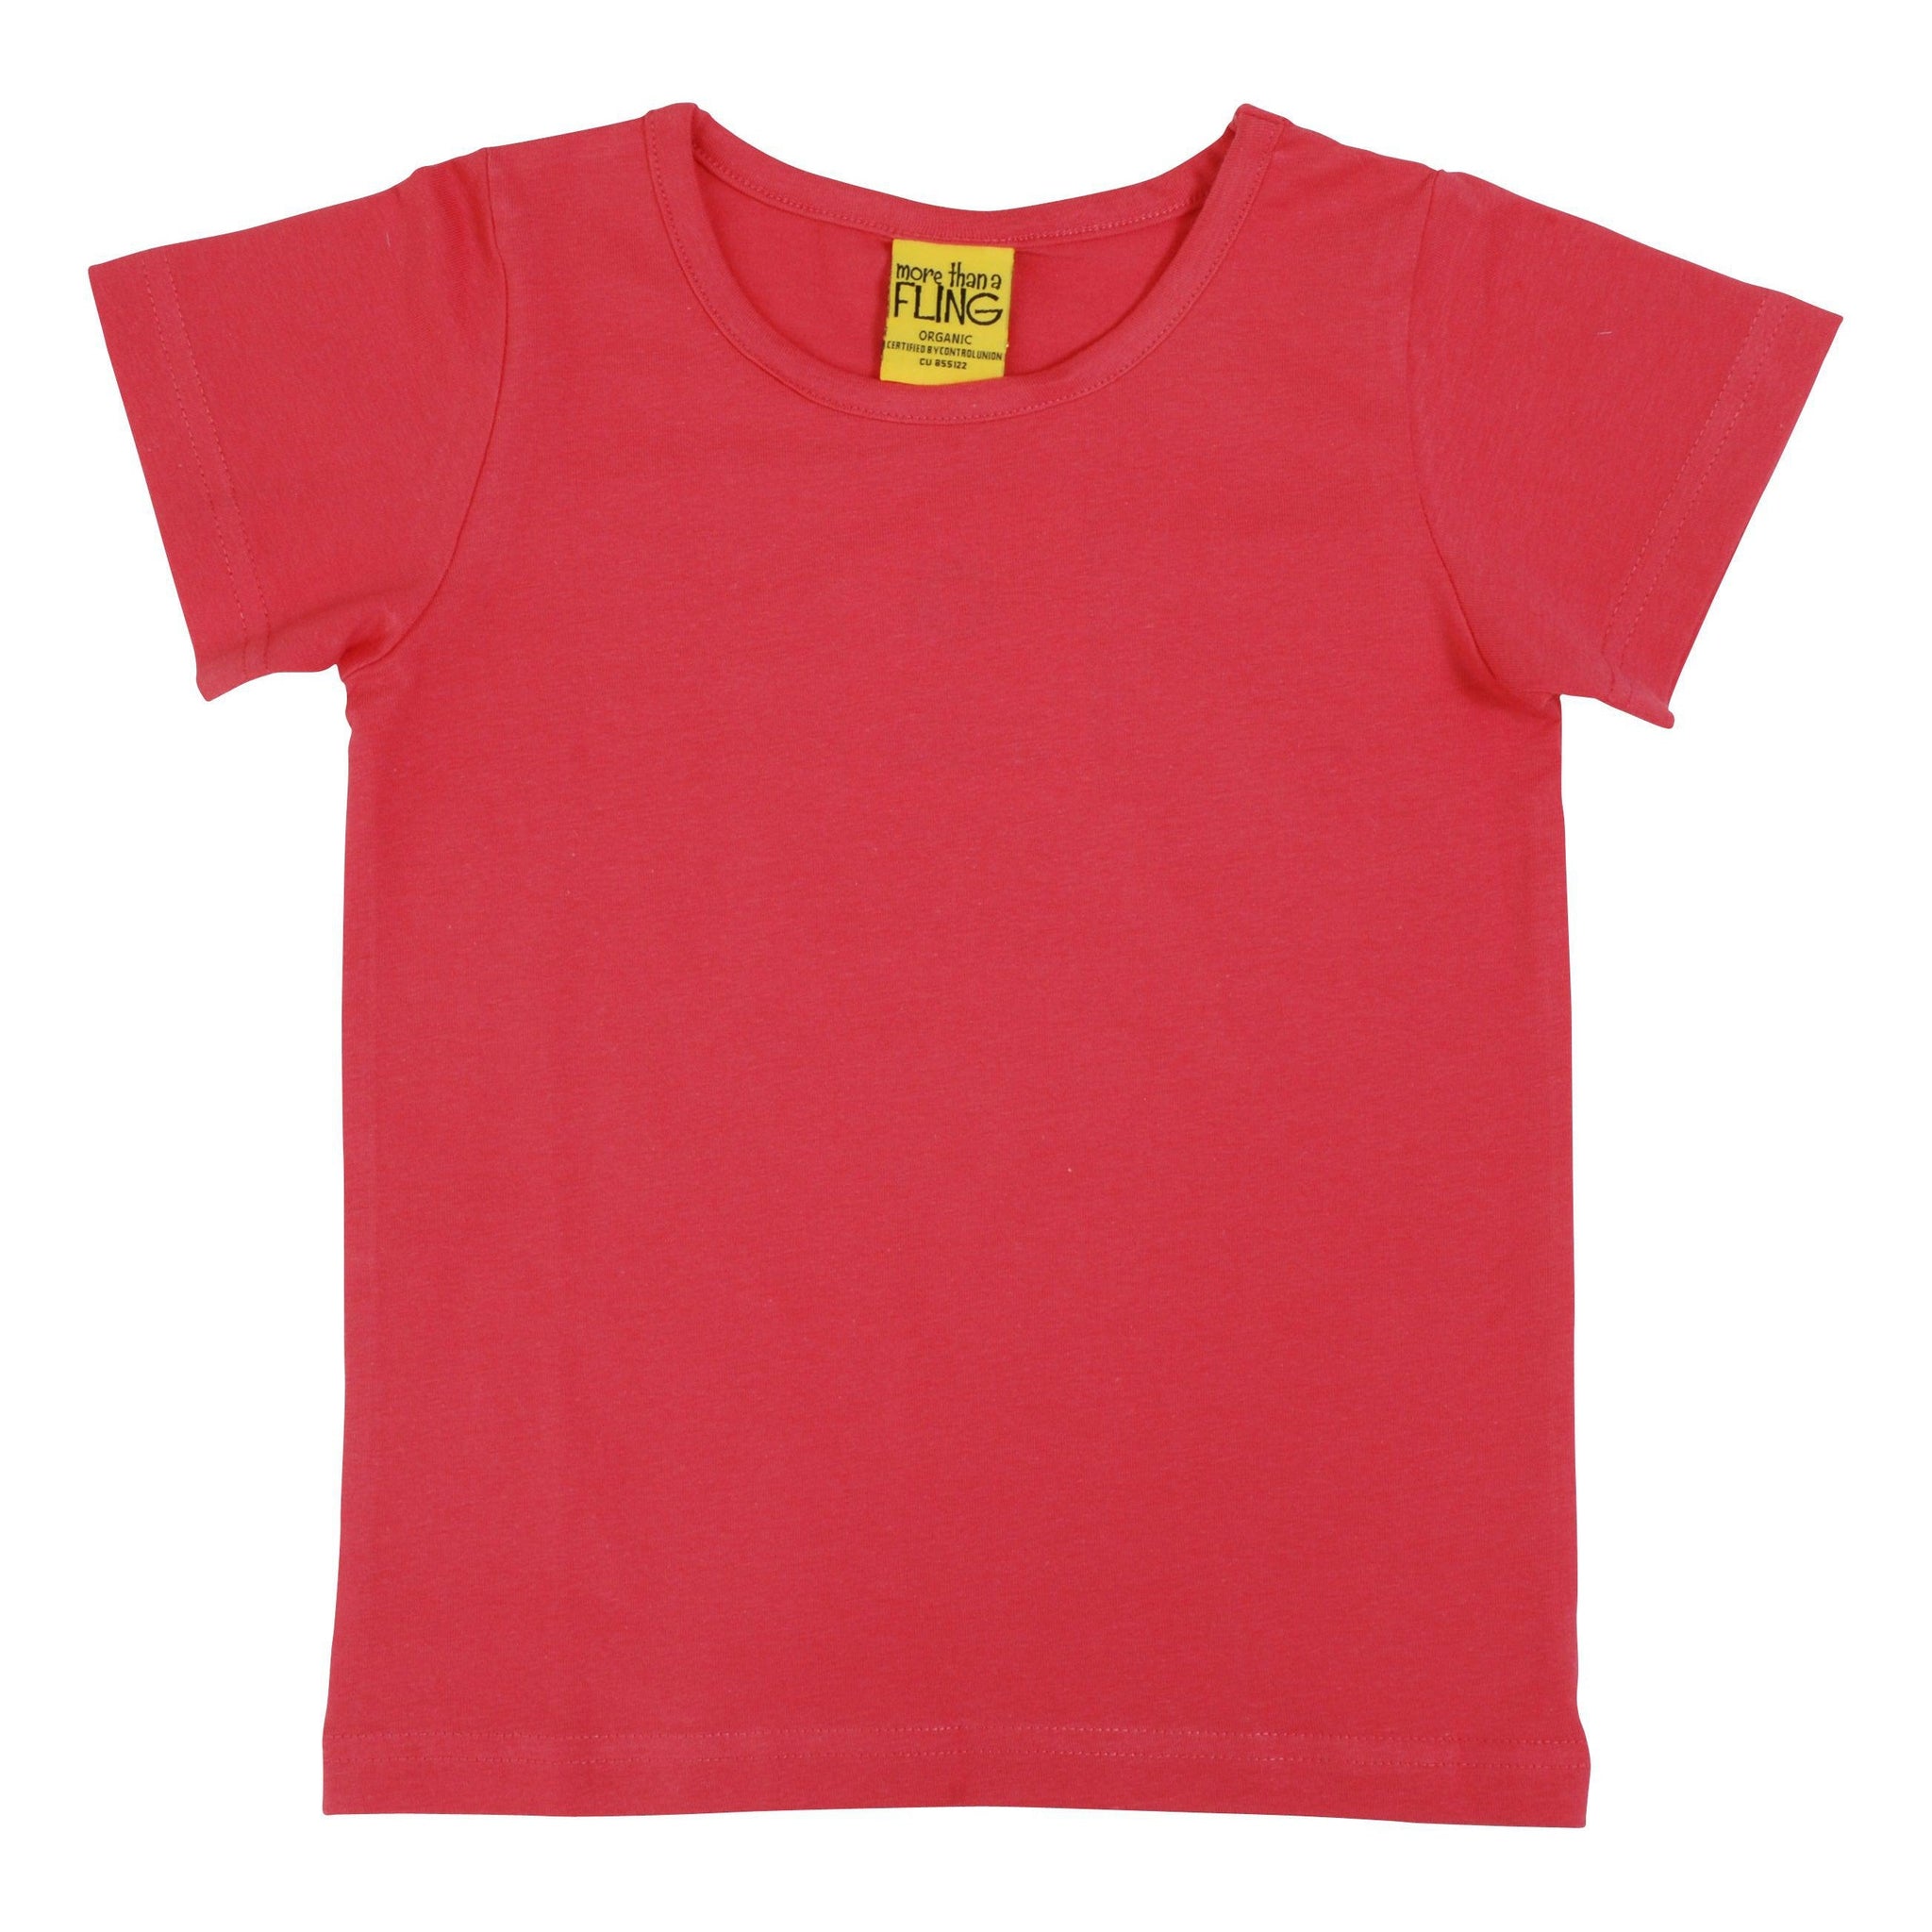 More Than A FLING - Rouge Red (Hot Pink) Short Sleeved Top